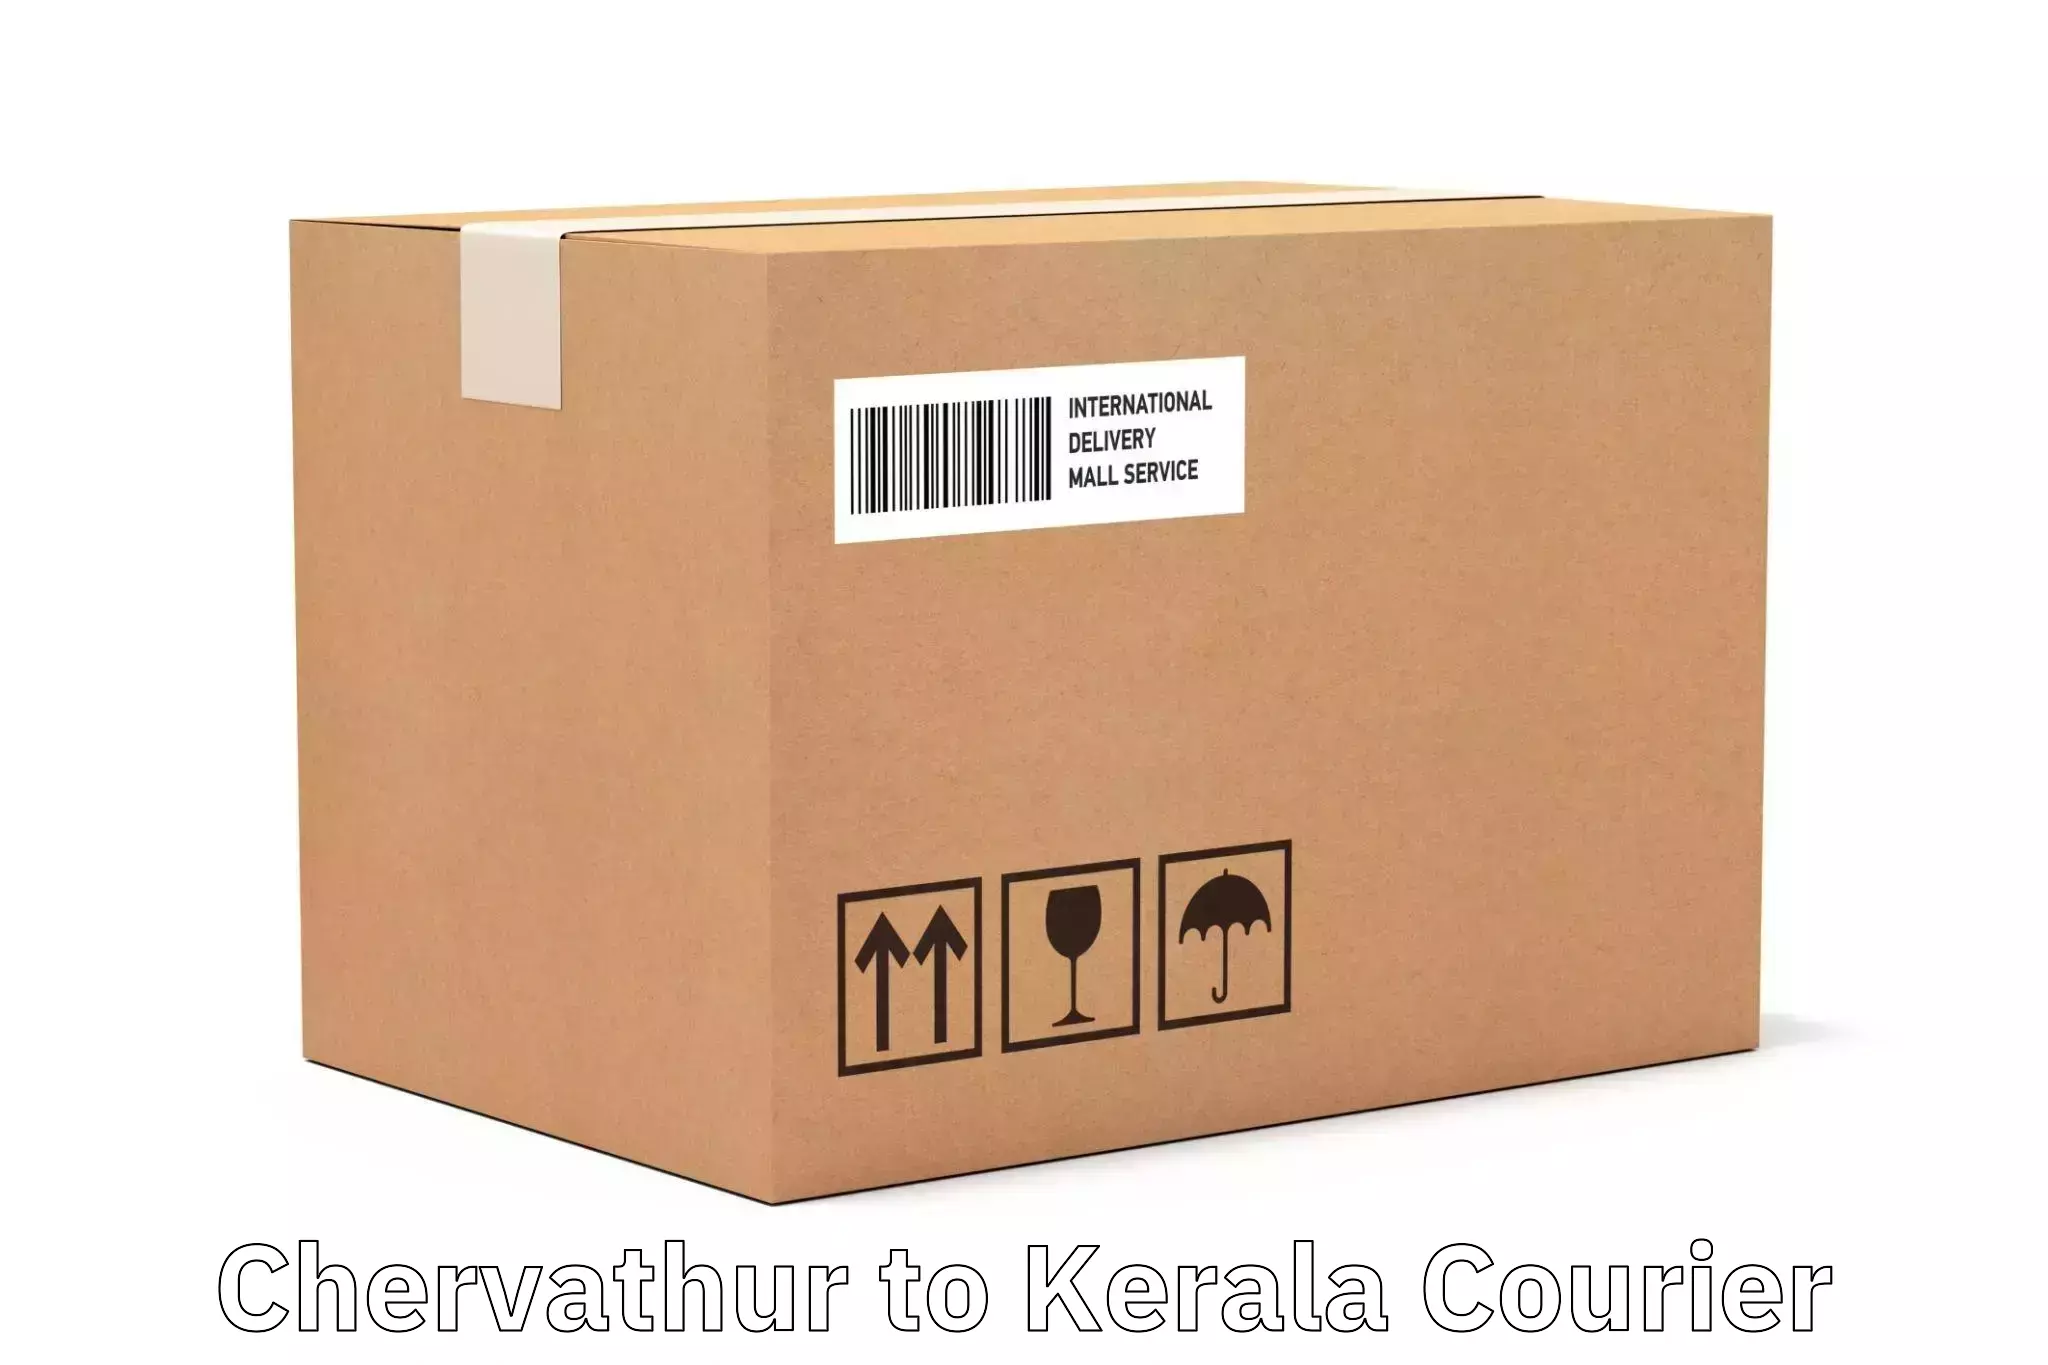 Personalized courier experiences Chervathur to Poinachi